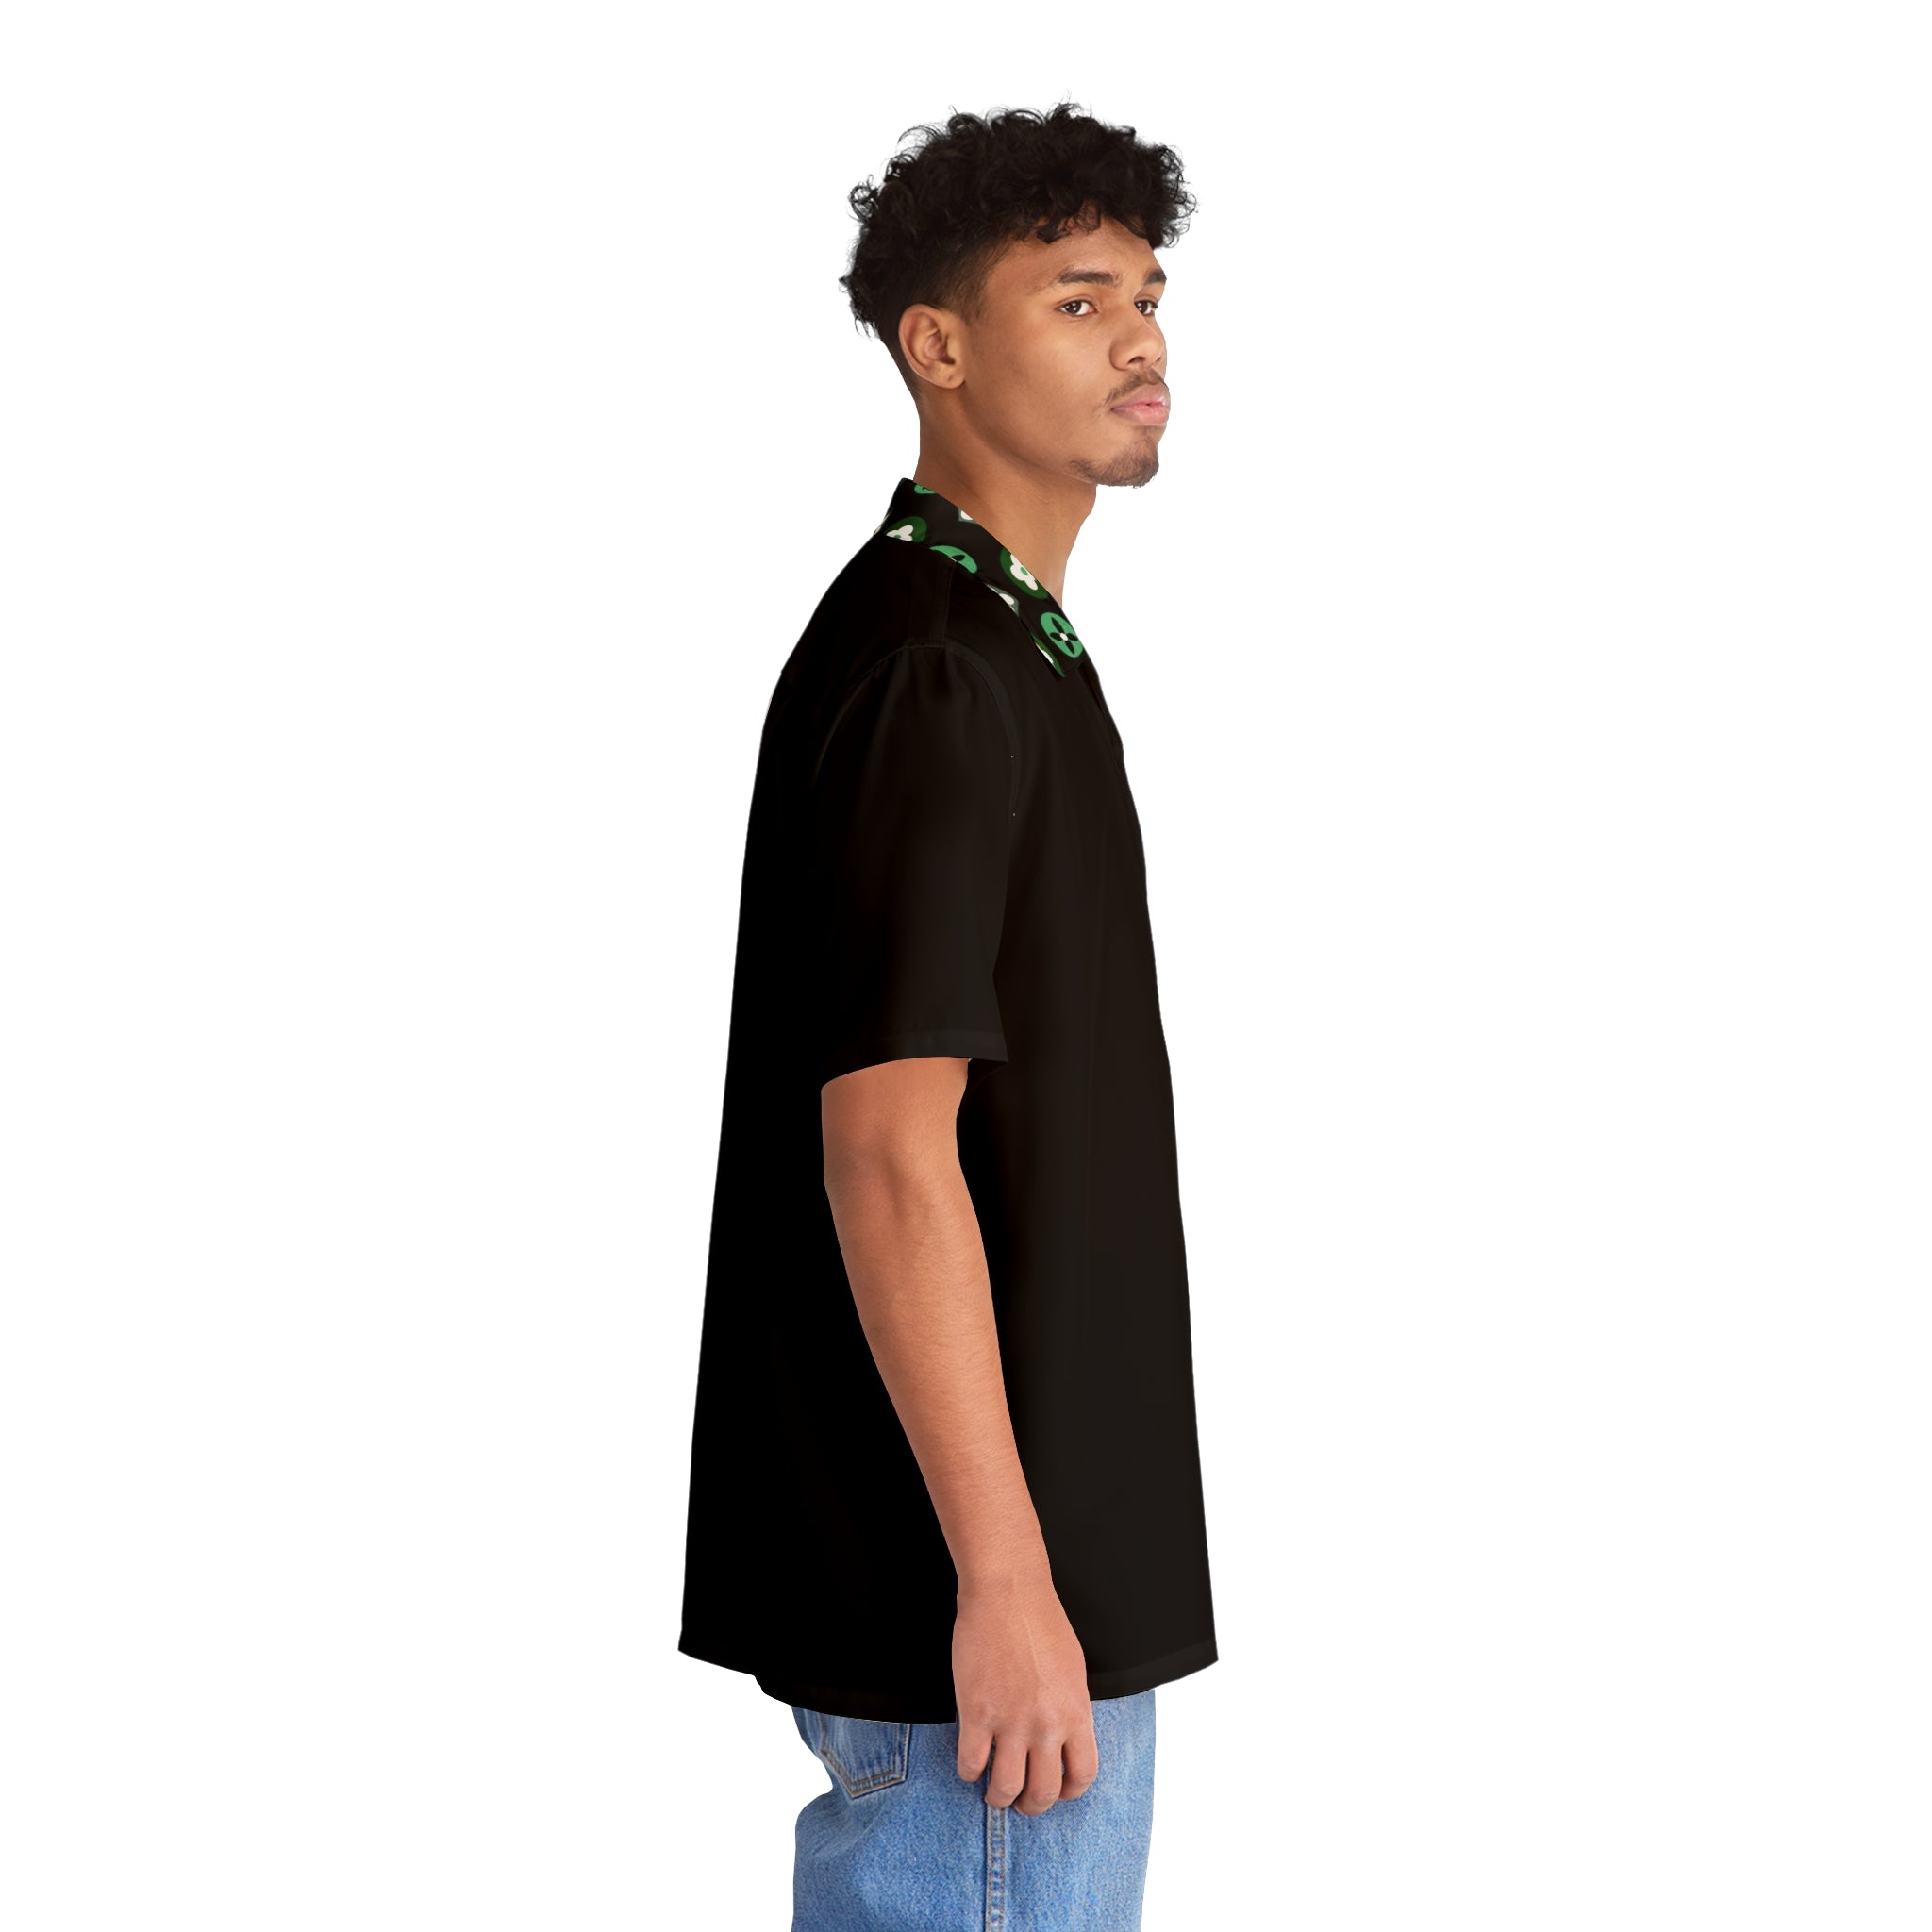  Groove Collection Trilogy of Icons Pocket Grid (Greens) Black Unisex Gender Neutral Button Up Shirt, Hawaiian Shirt All Over Prints